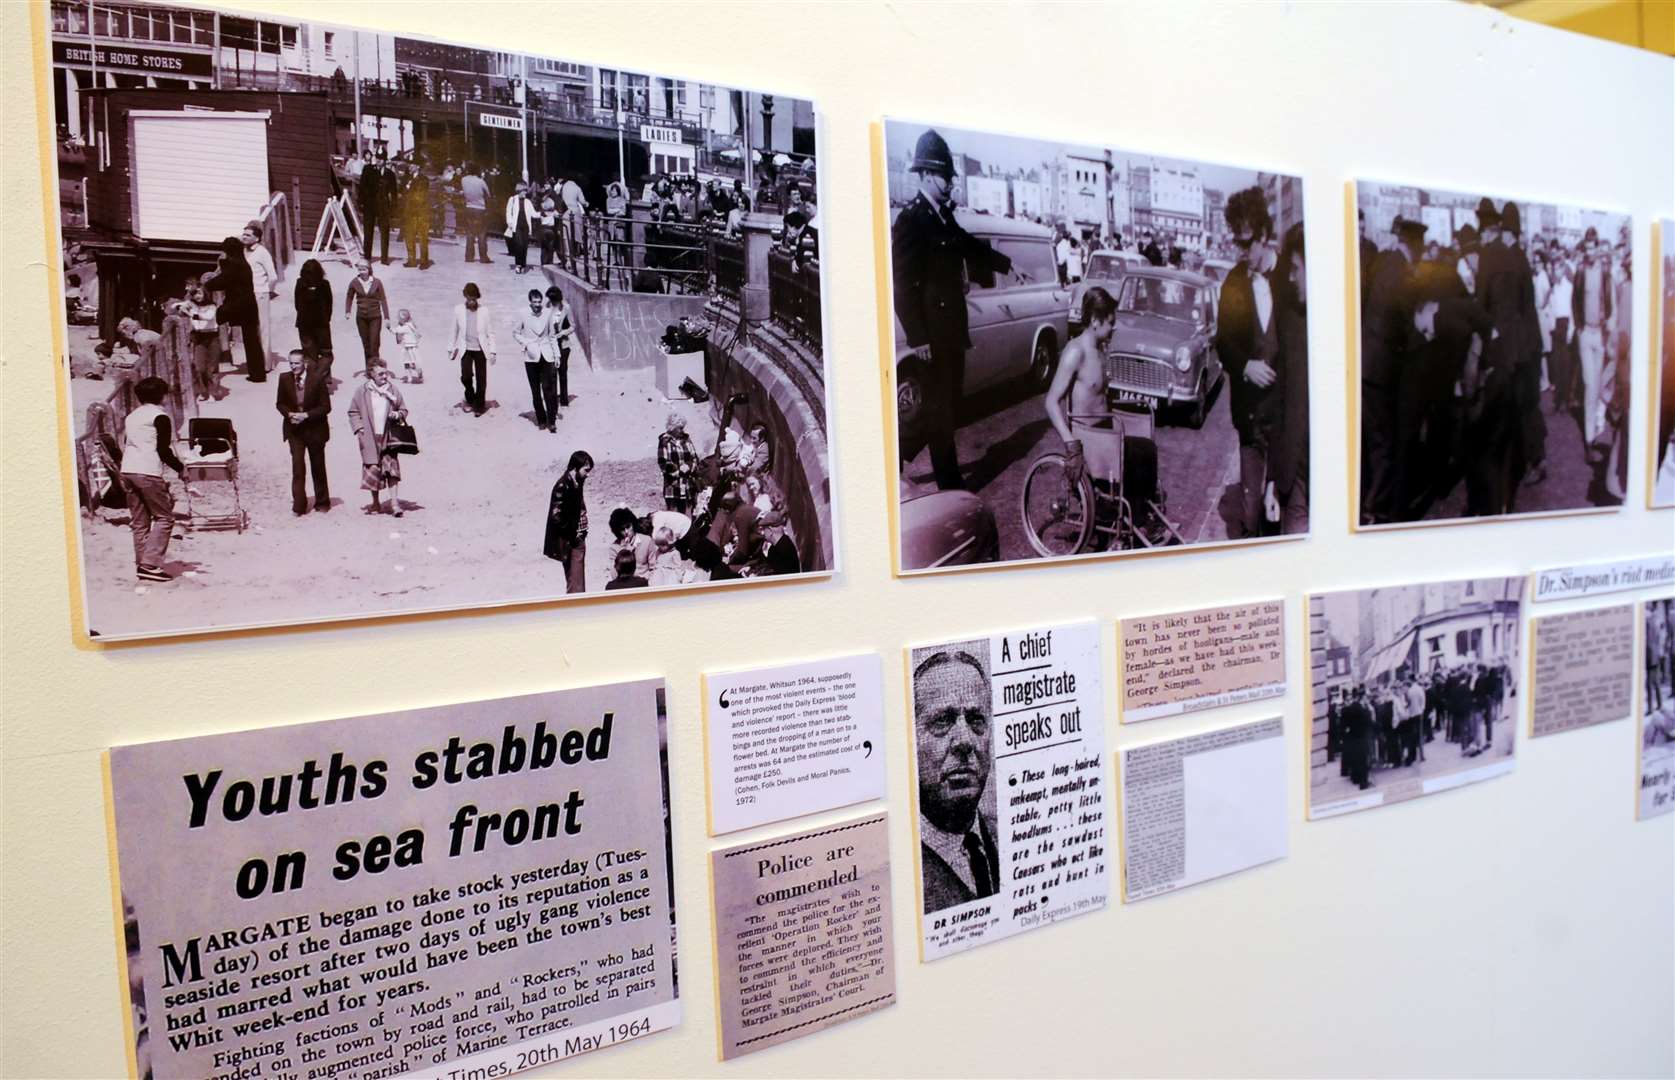 Scenes from an exhibition marking the Mods and Rockers at Margate Museum in 2012